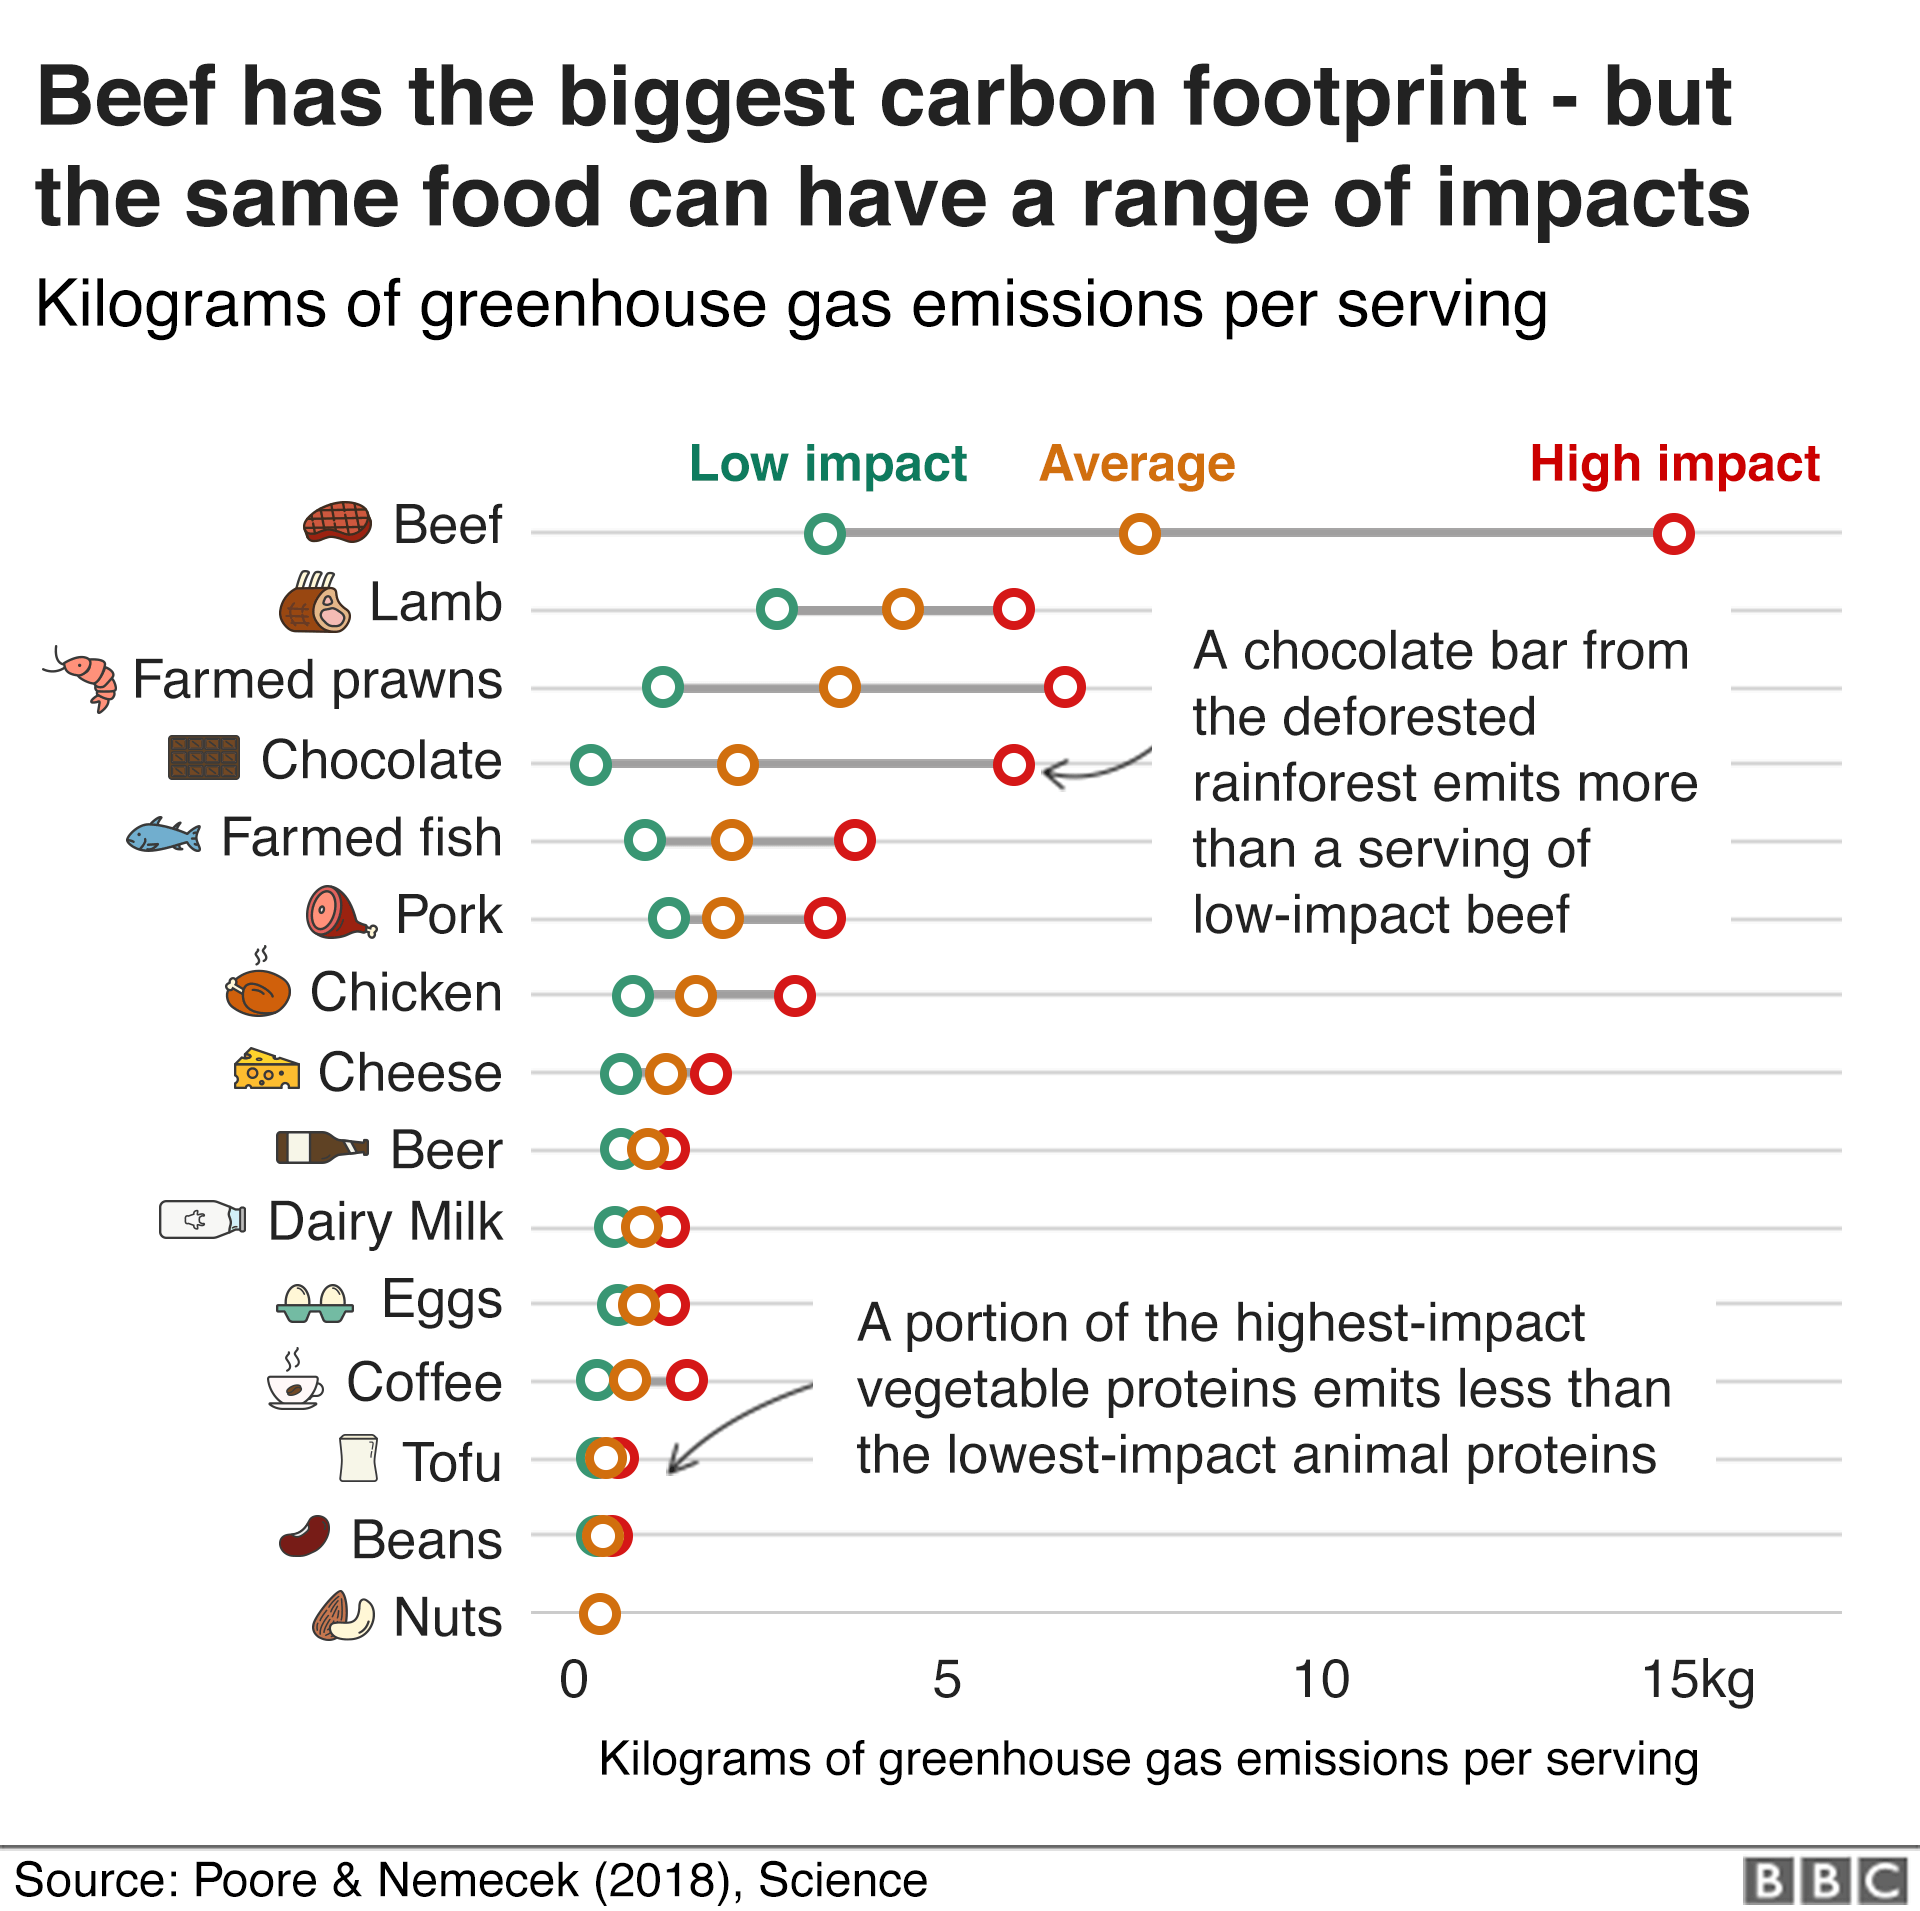 Graph showing the climate impacts of different foods: beef has the highest carbon footprint, but the same food can have very different impacts